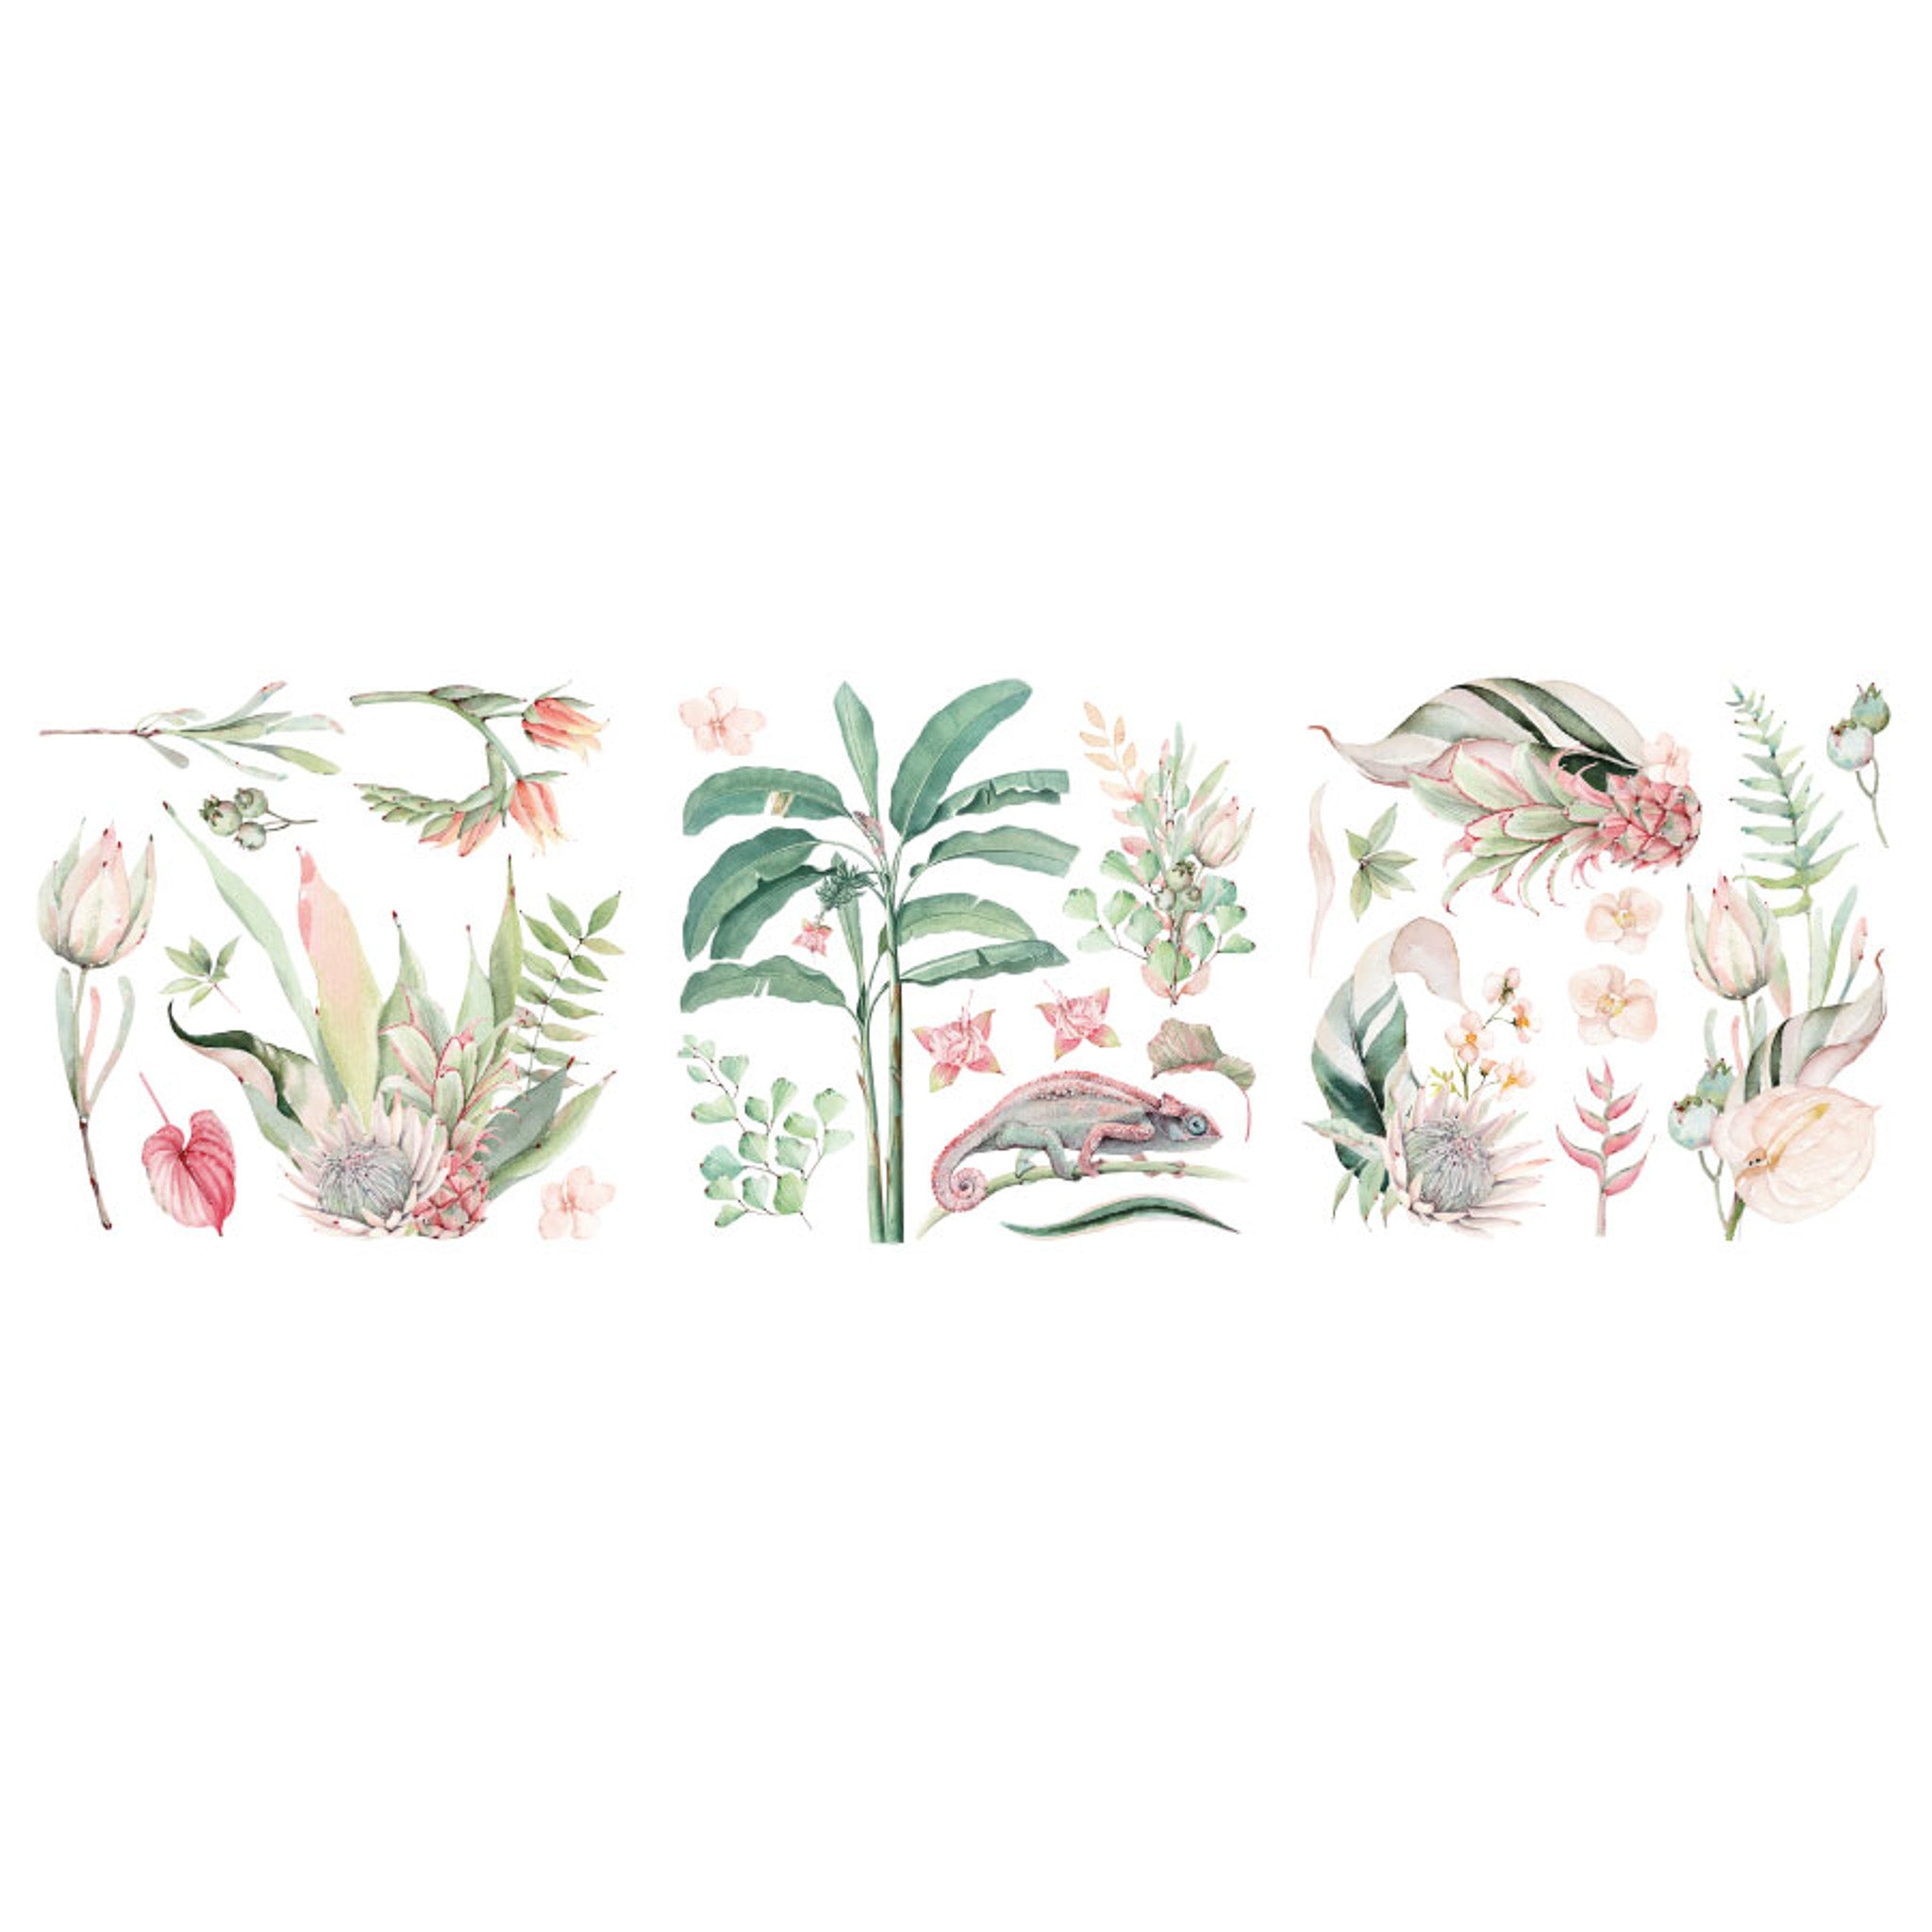 On a white background are three 12 x 12 inch sheets of small rub-on transfers featuring lush pink and green tropical foliage and a chameleon.